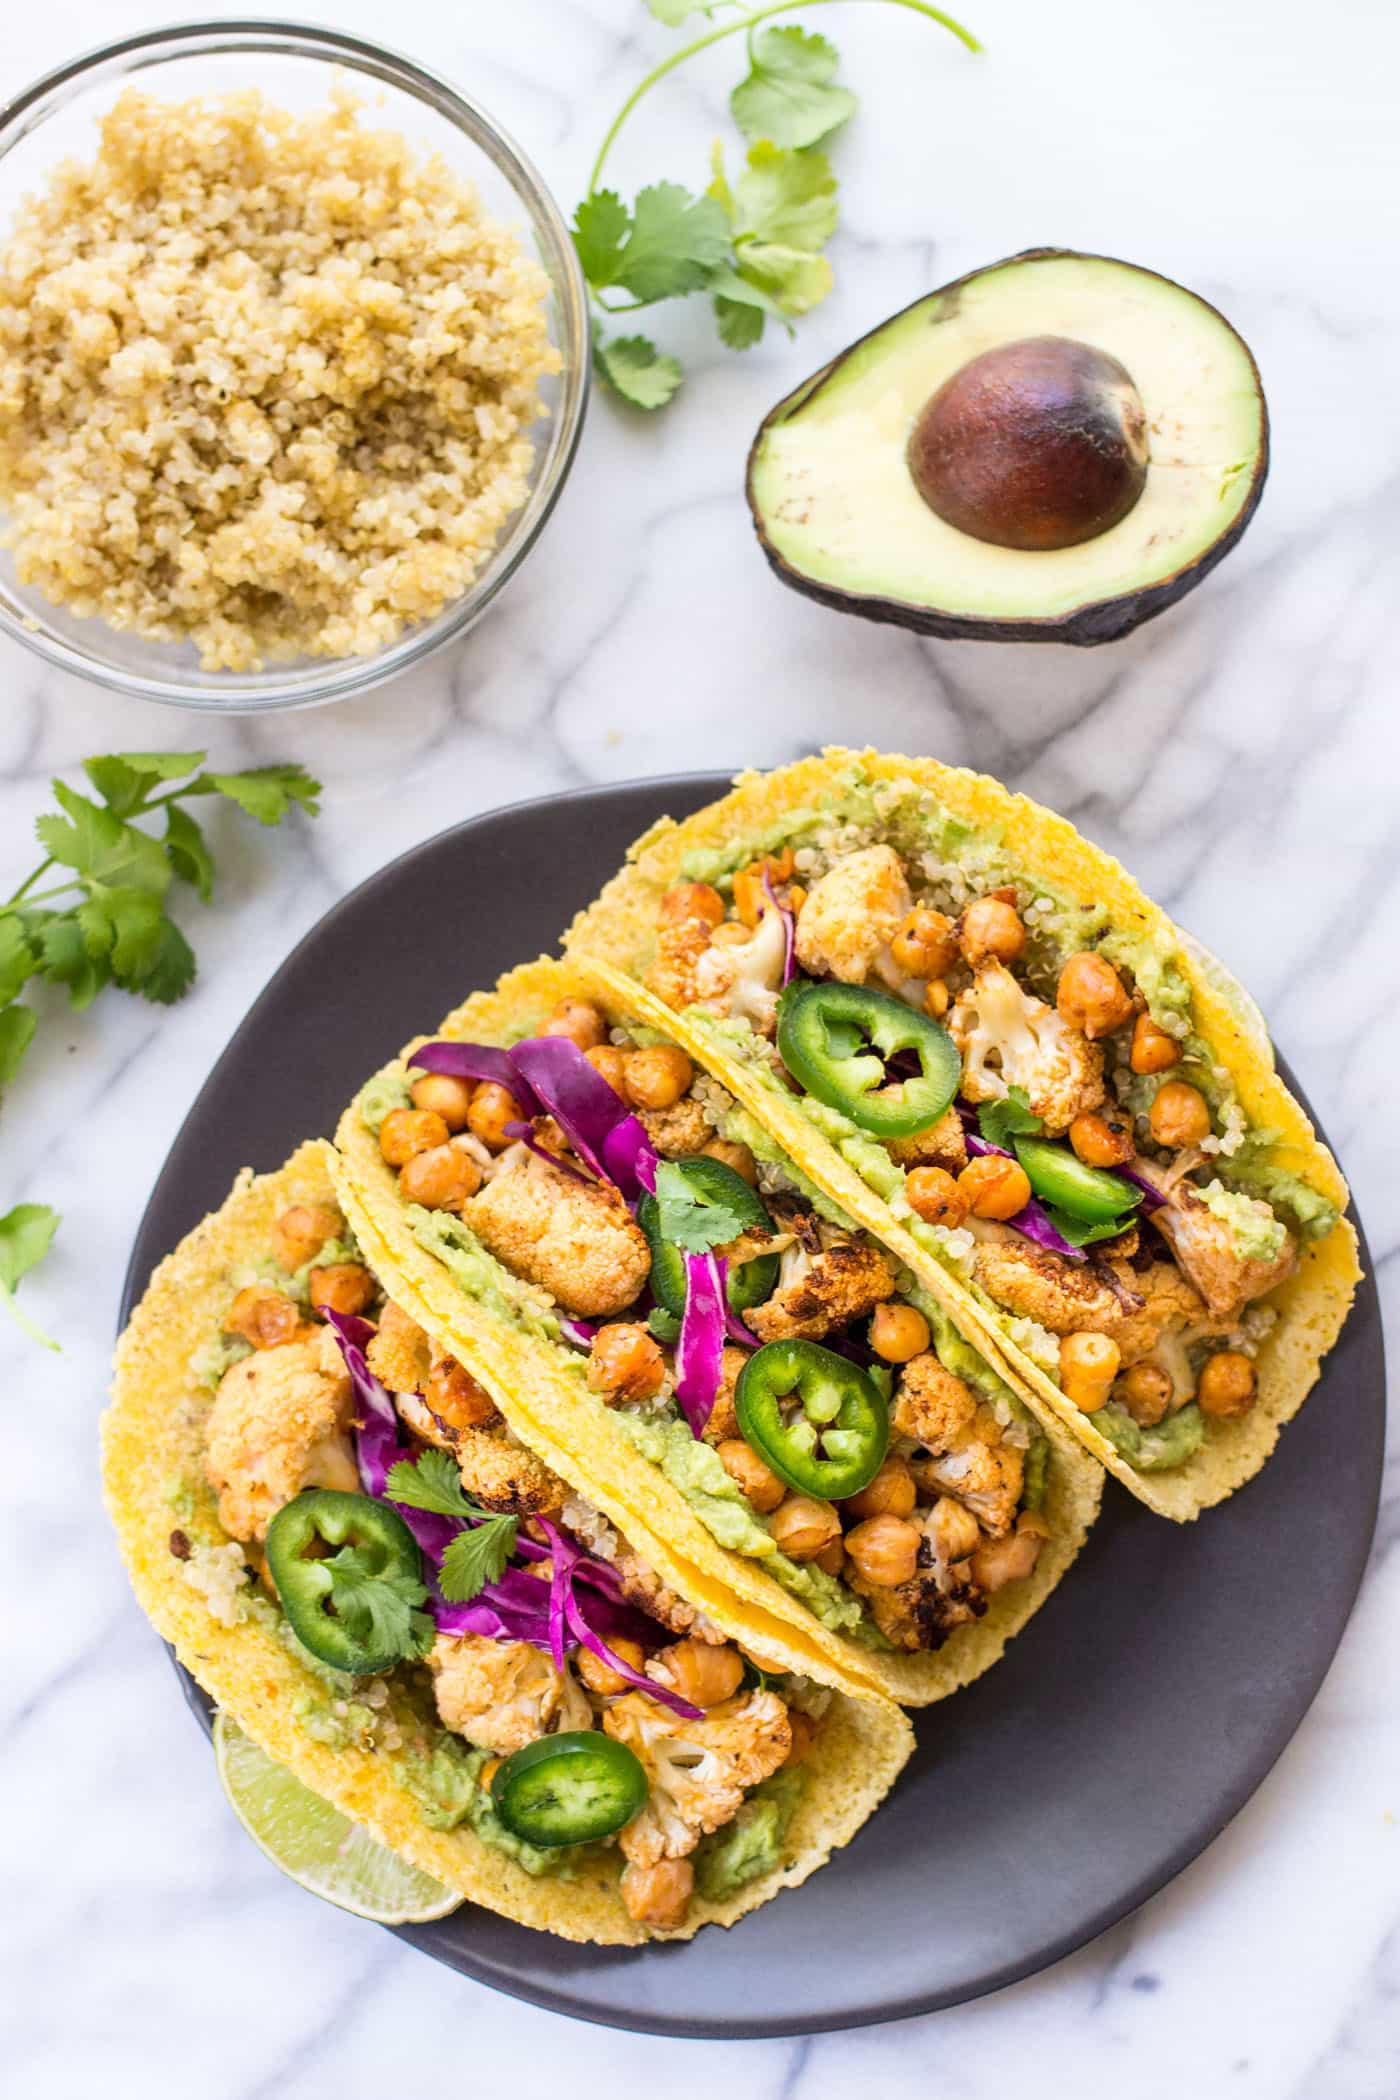 BUFFALO CAULIFLOWER + QUINOA TACOS -- a healthy meatless meal that is packed with nutrition and TONS of flavor!